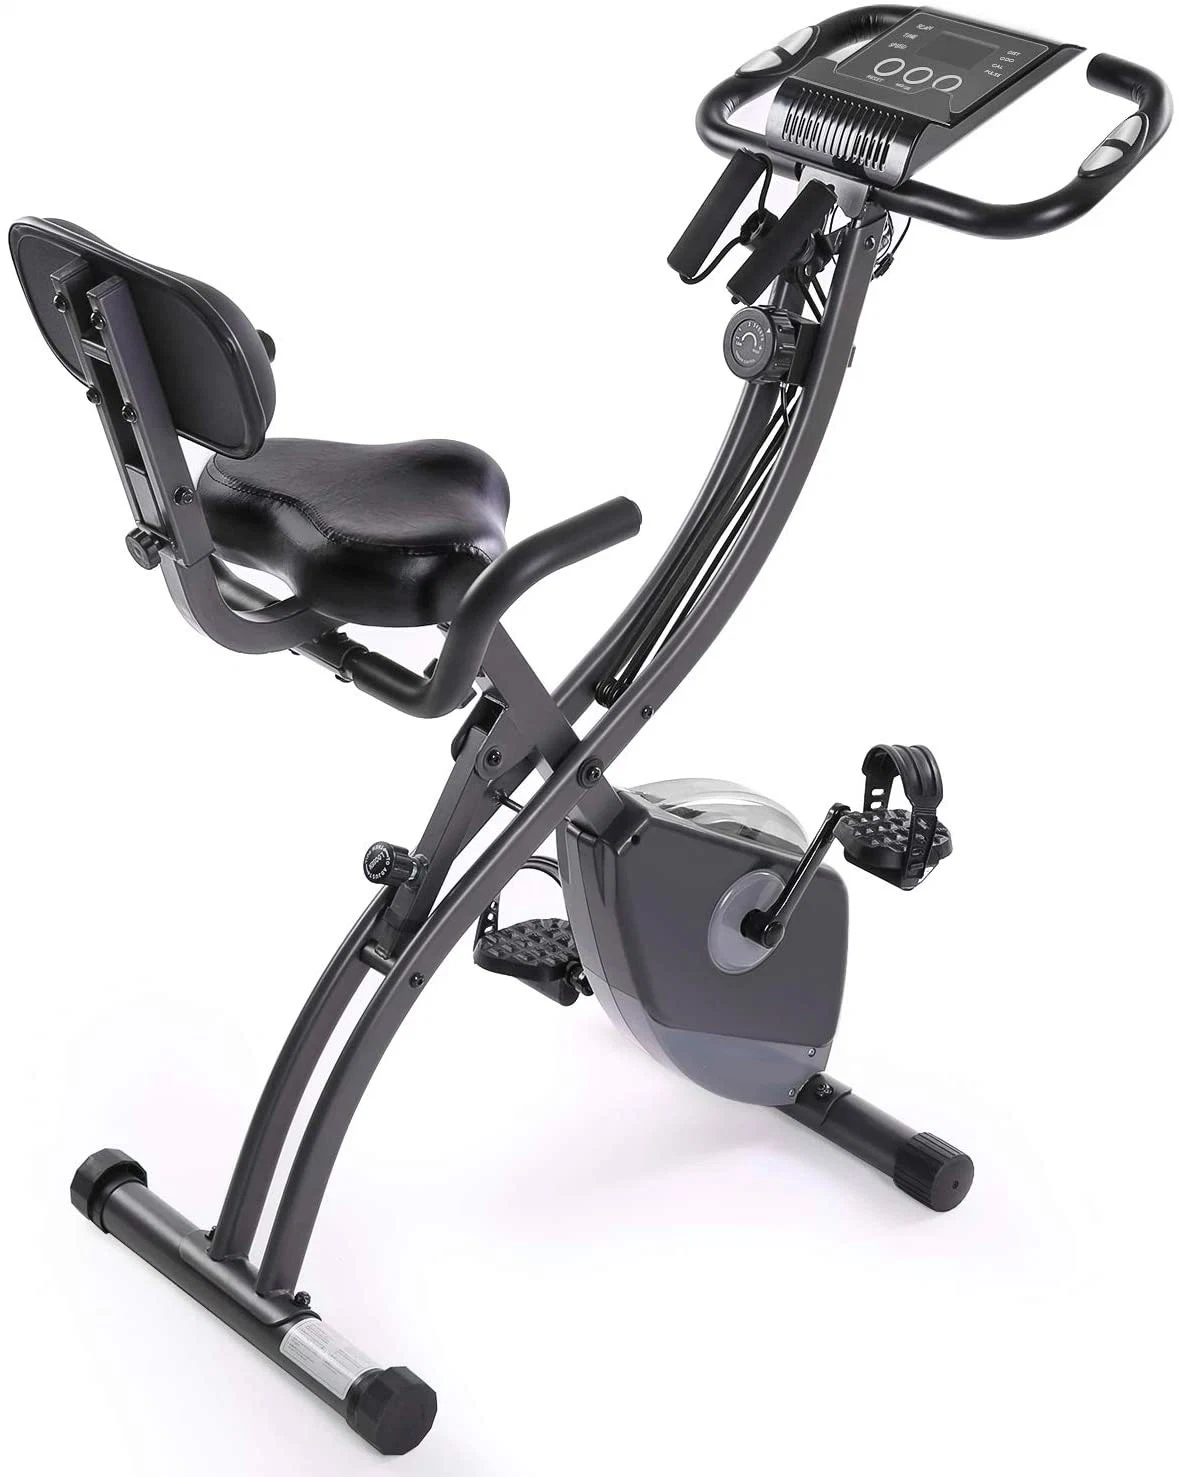 Perfect Home Exercise Gym Fitness Equipment for Folding Indoor Bike